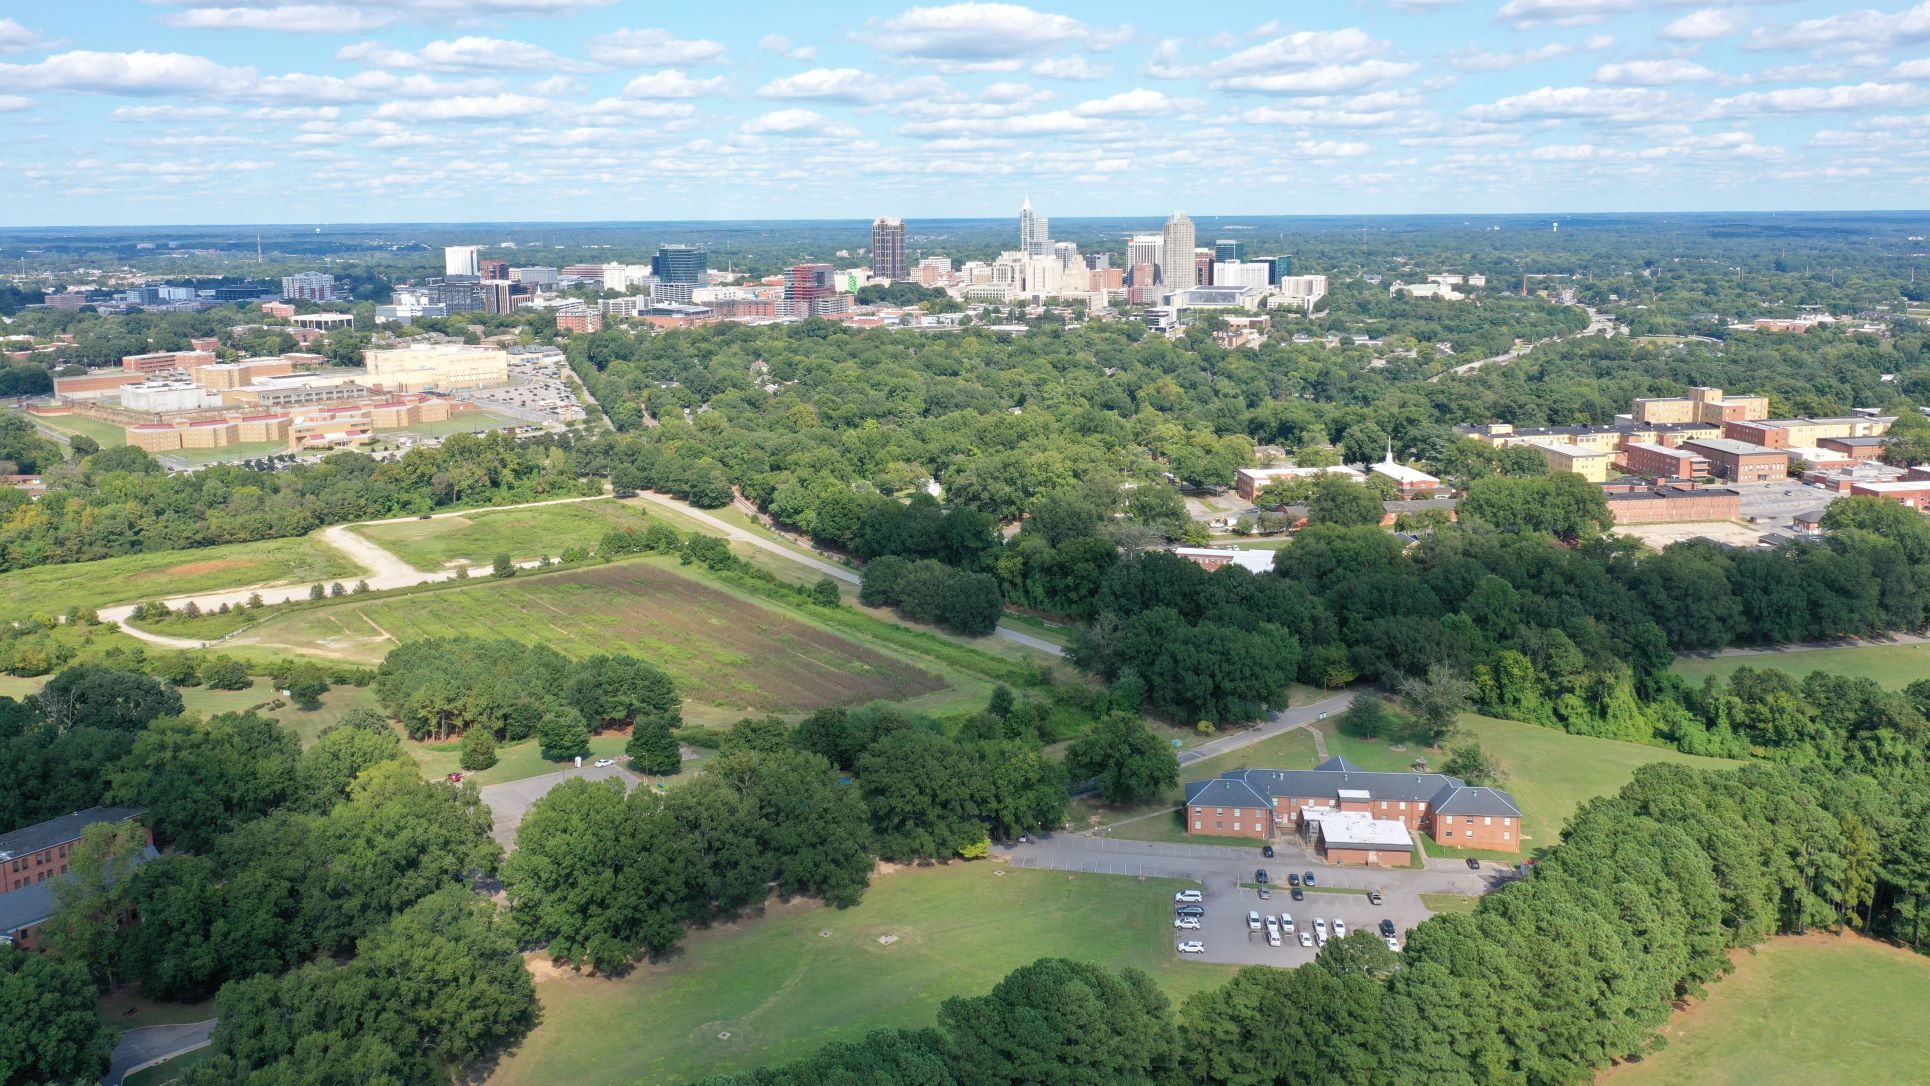 Drone shot of Dix Park looing towards downtown Raleigh